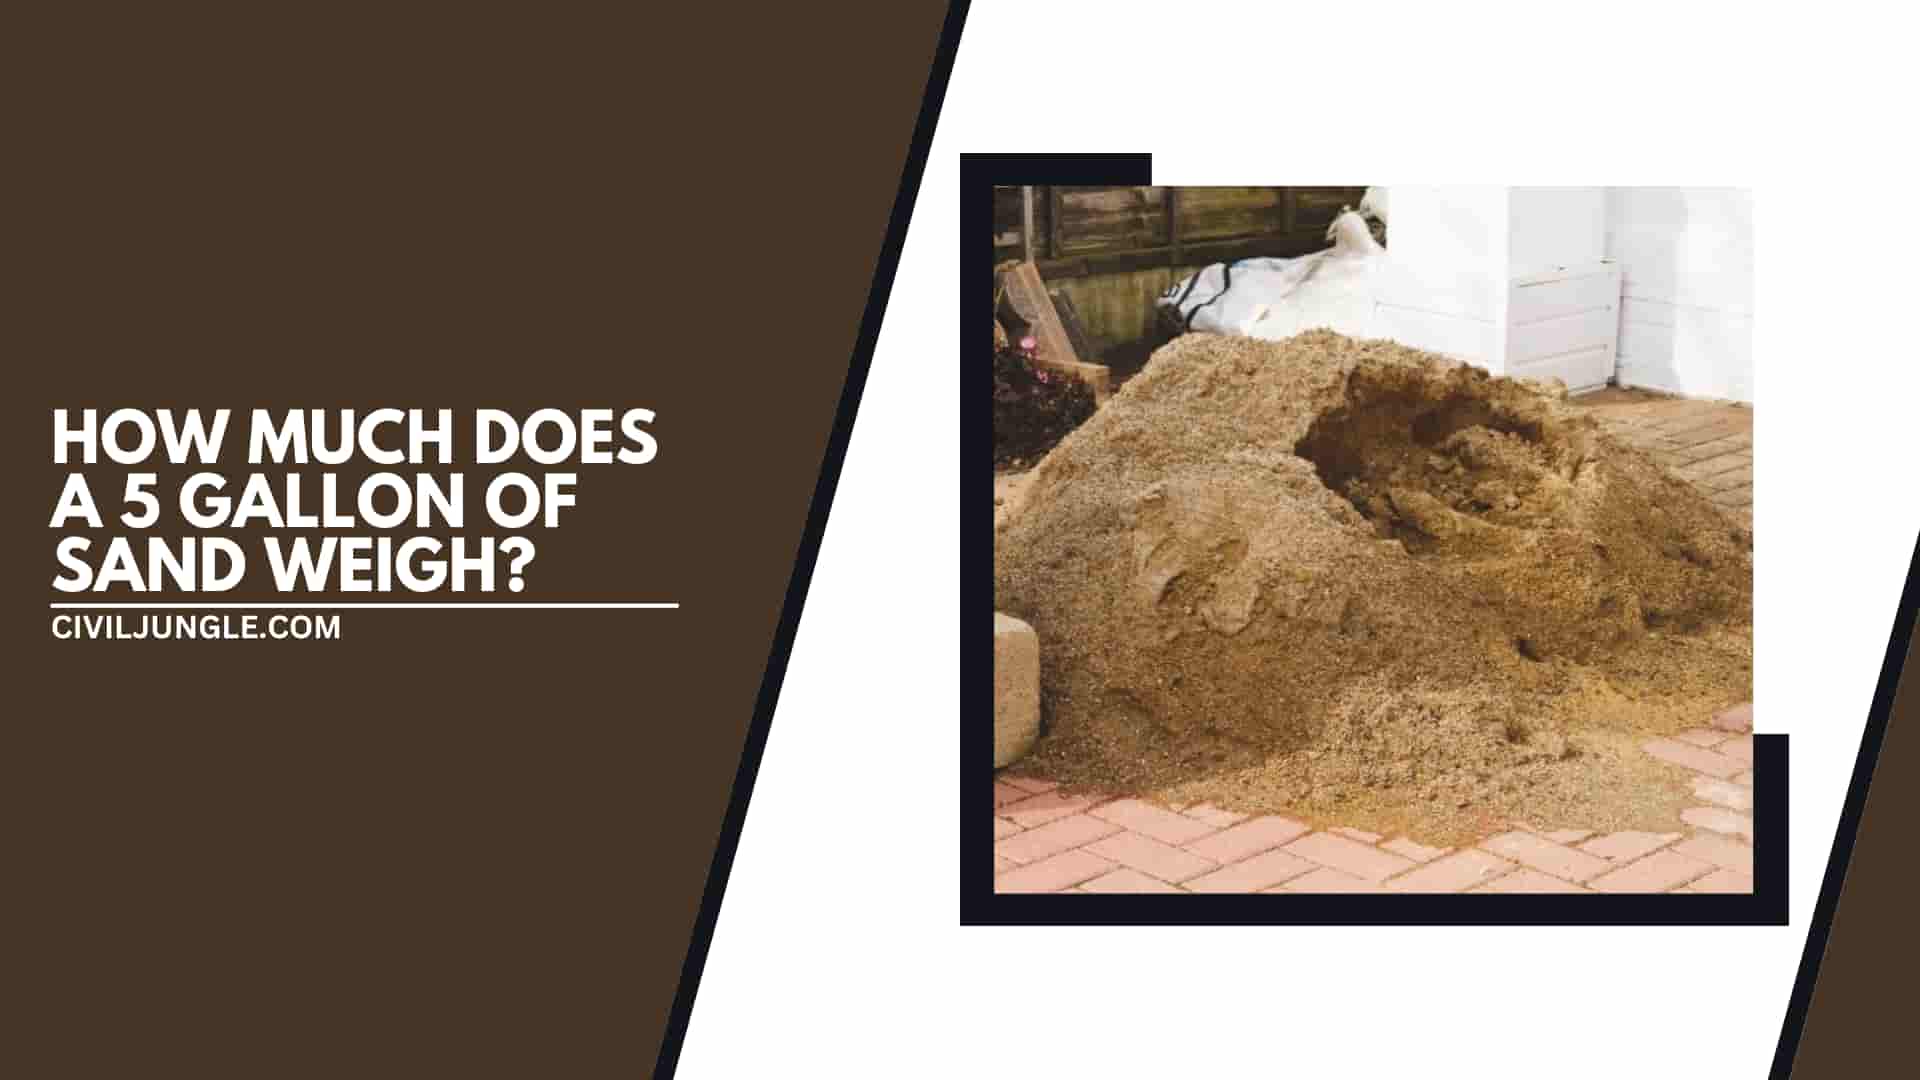 How Much Does a 5 Gallon of Sand Weigh?